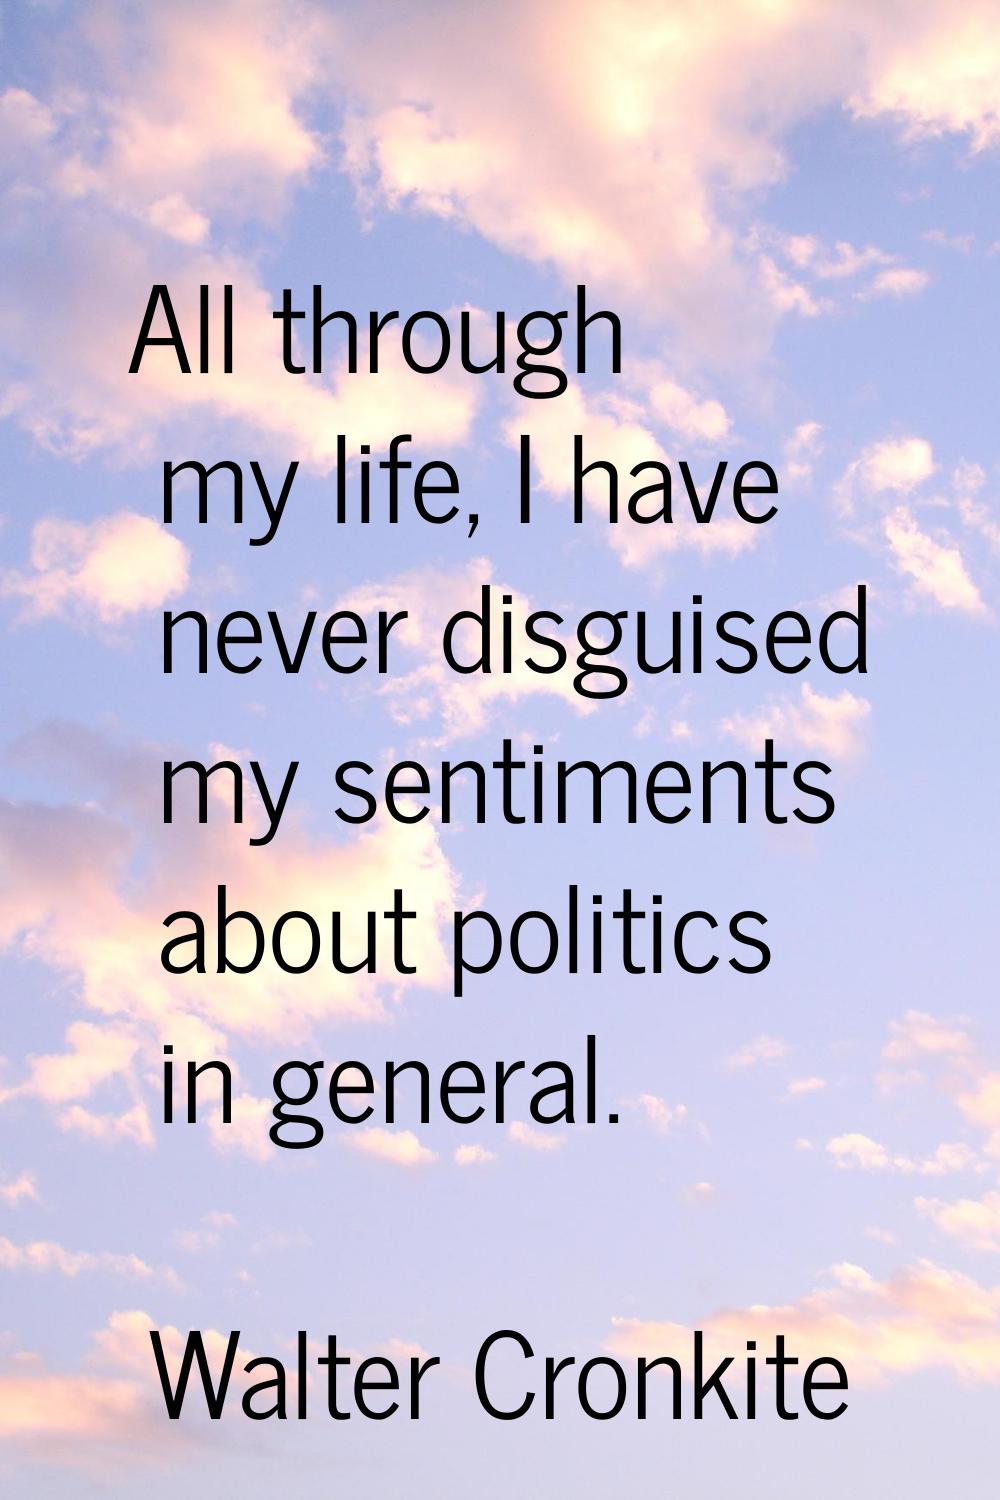 All through my life, I have never disguised my sentiments about politics in general.